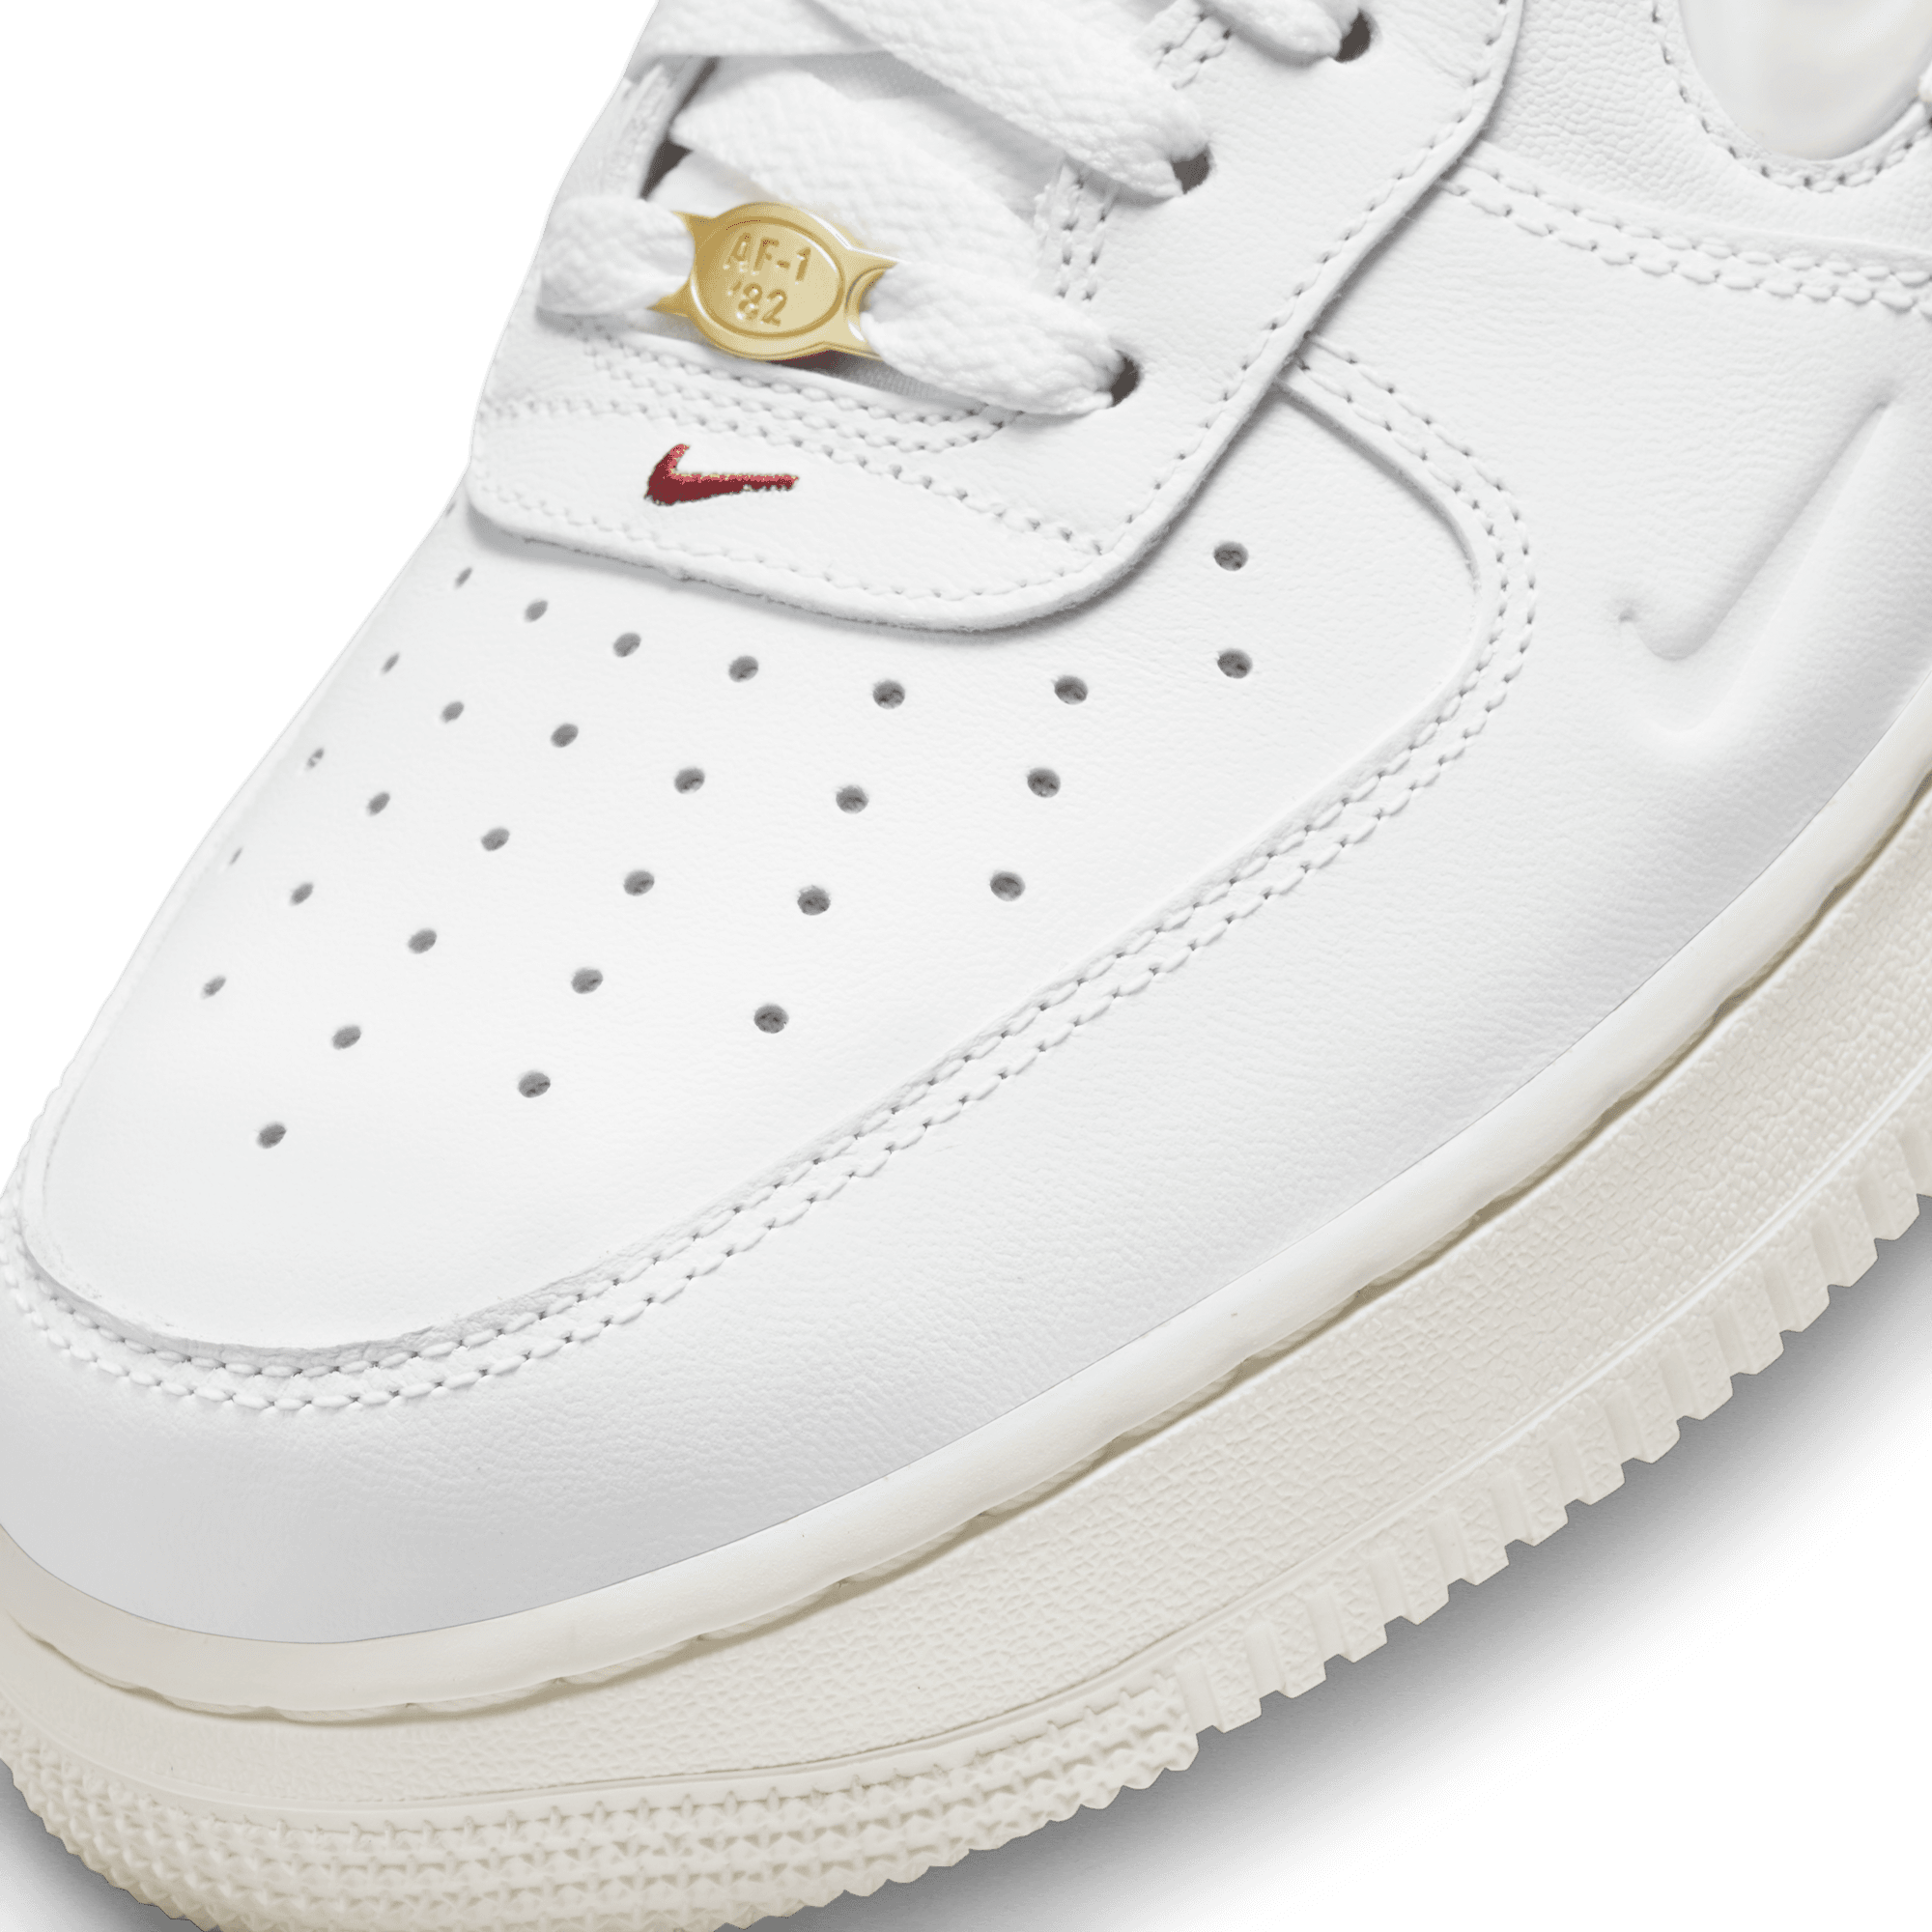 Nike Air Force 1 '07 Premium 'Join Forces Sail'